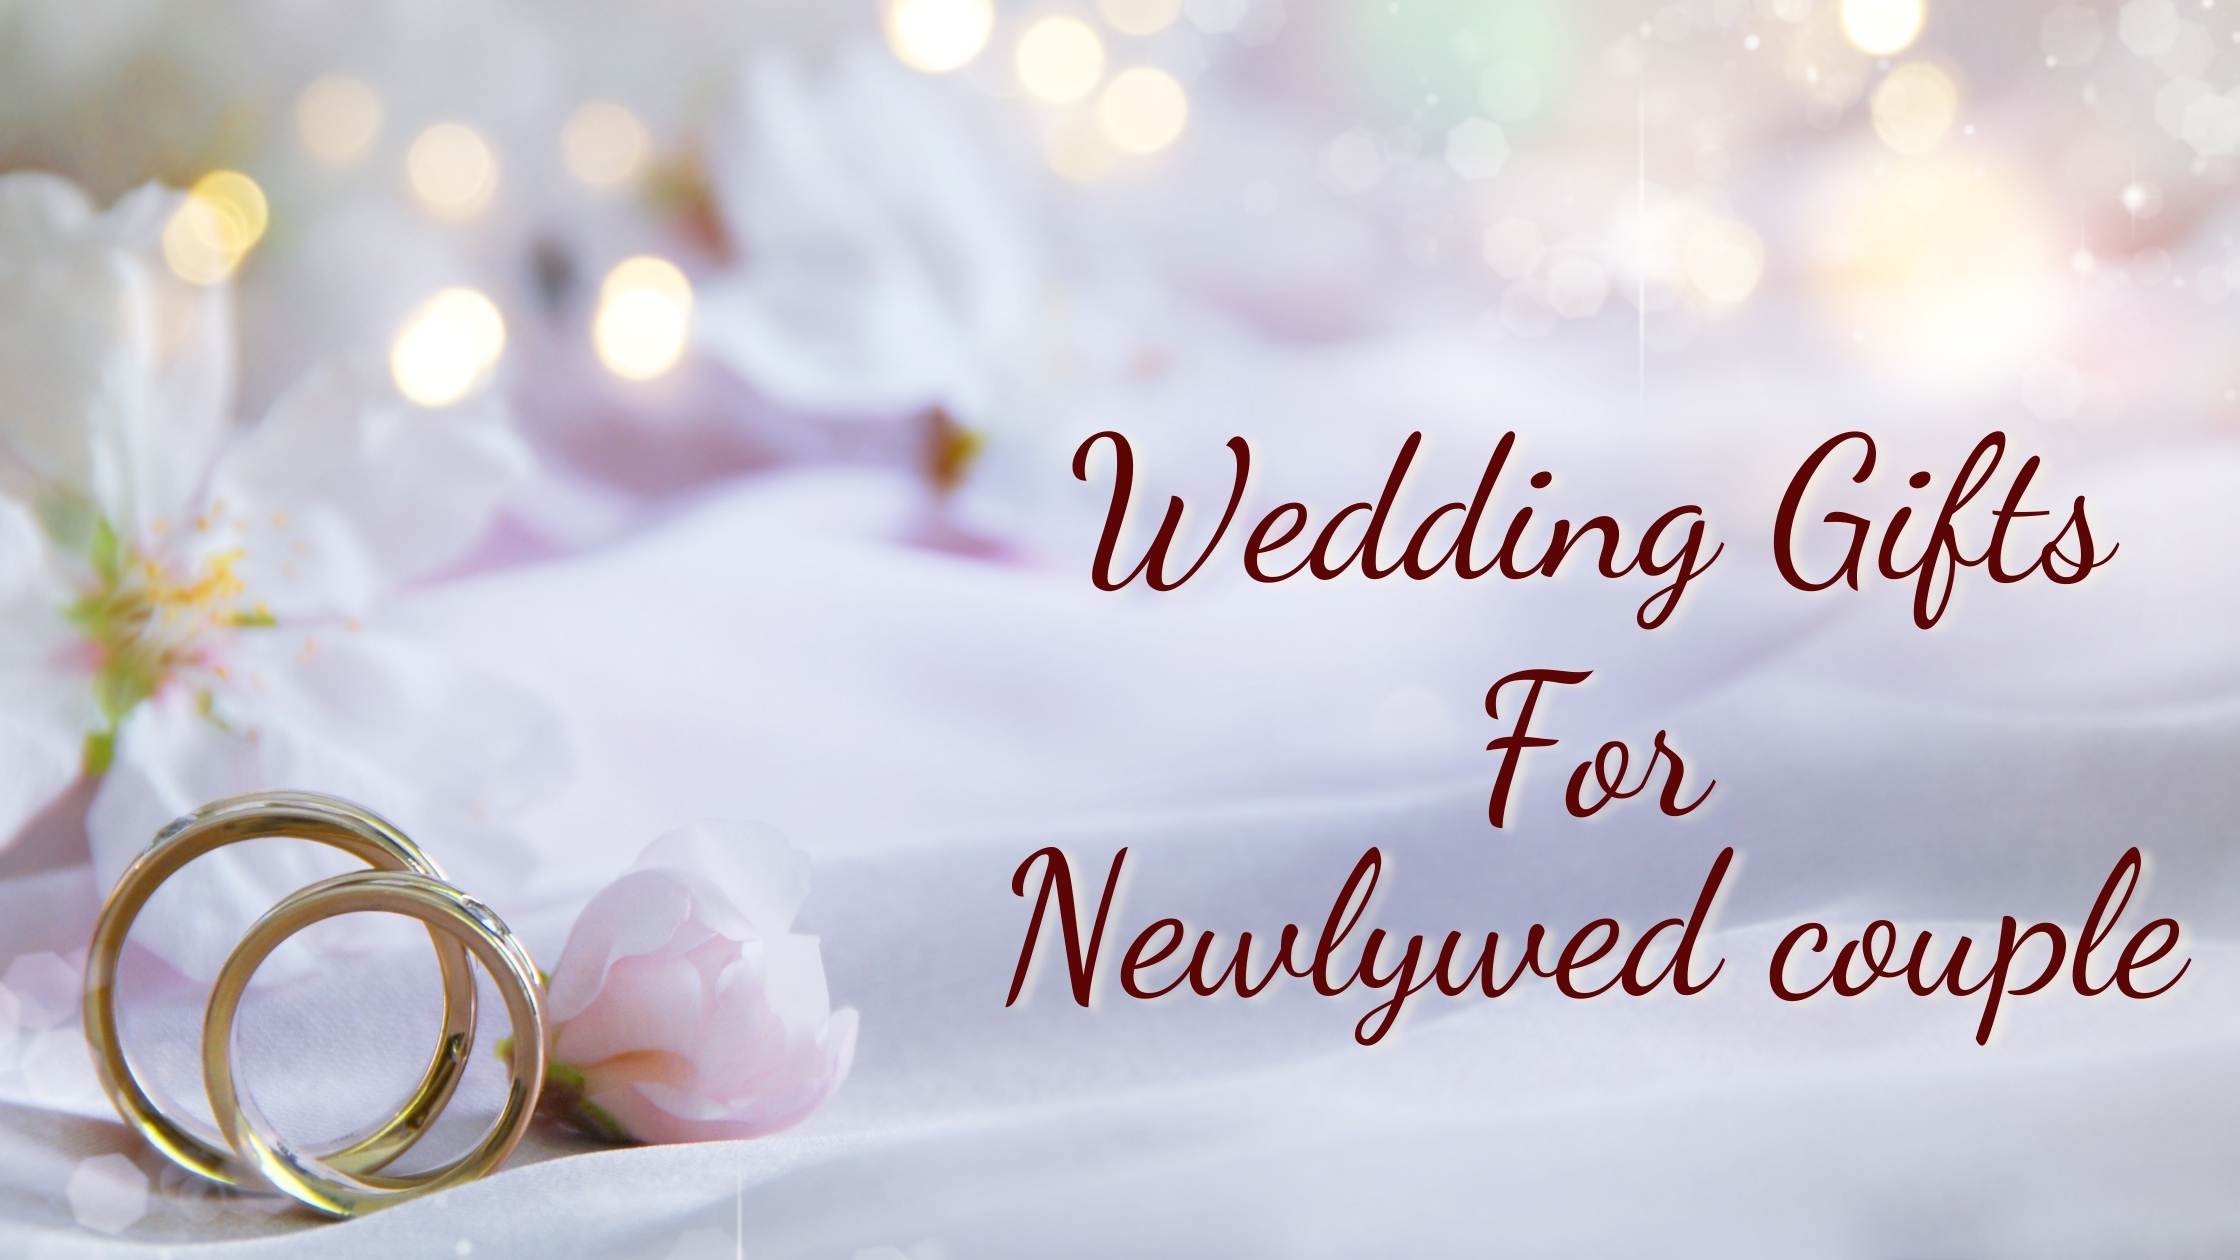 10 Unique Wedding Gifts Ideas Under 2K For Newlywed Couples